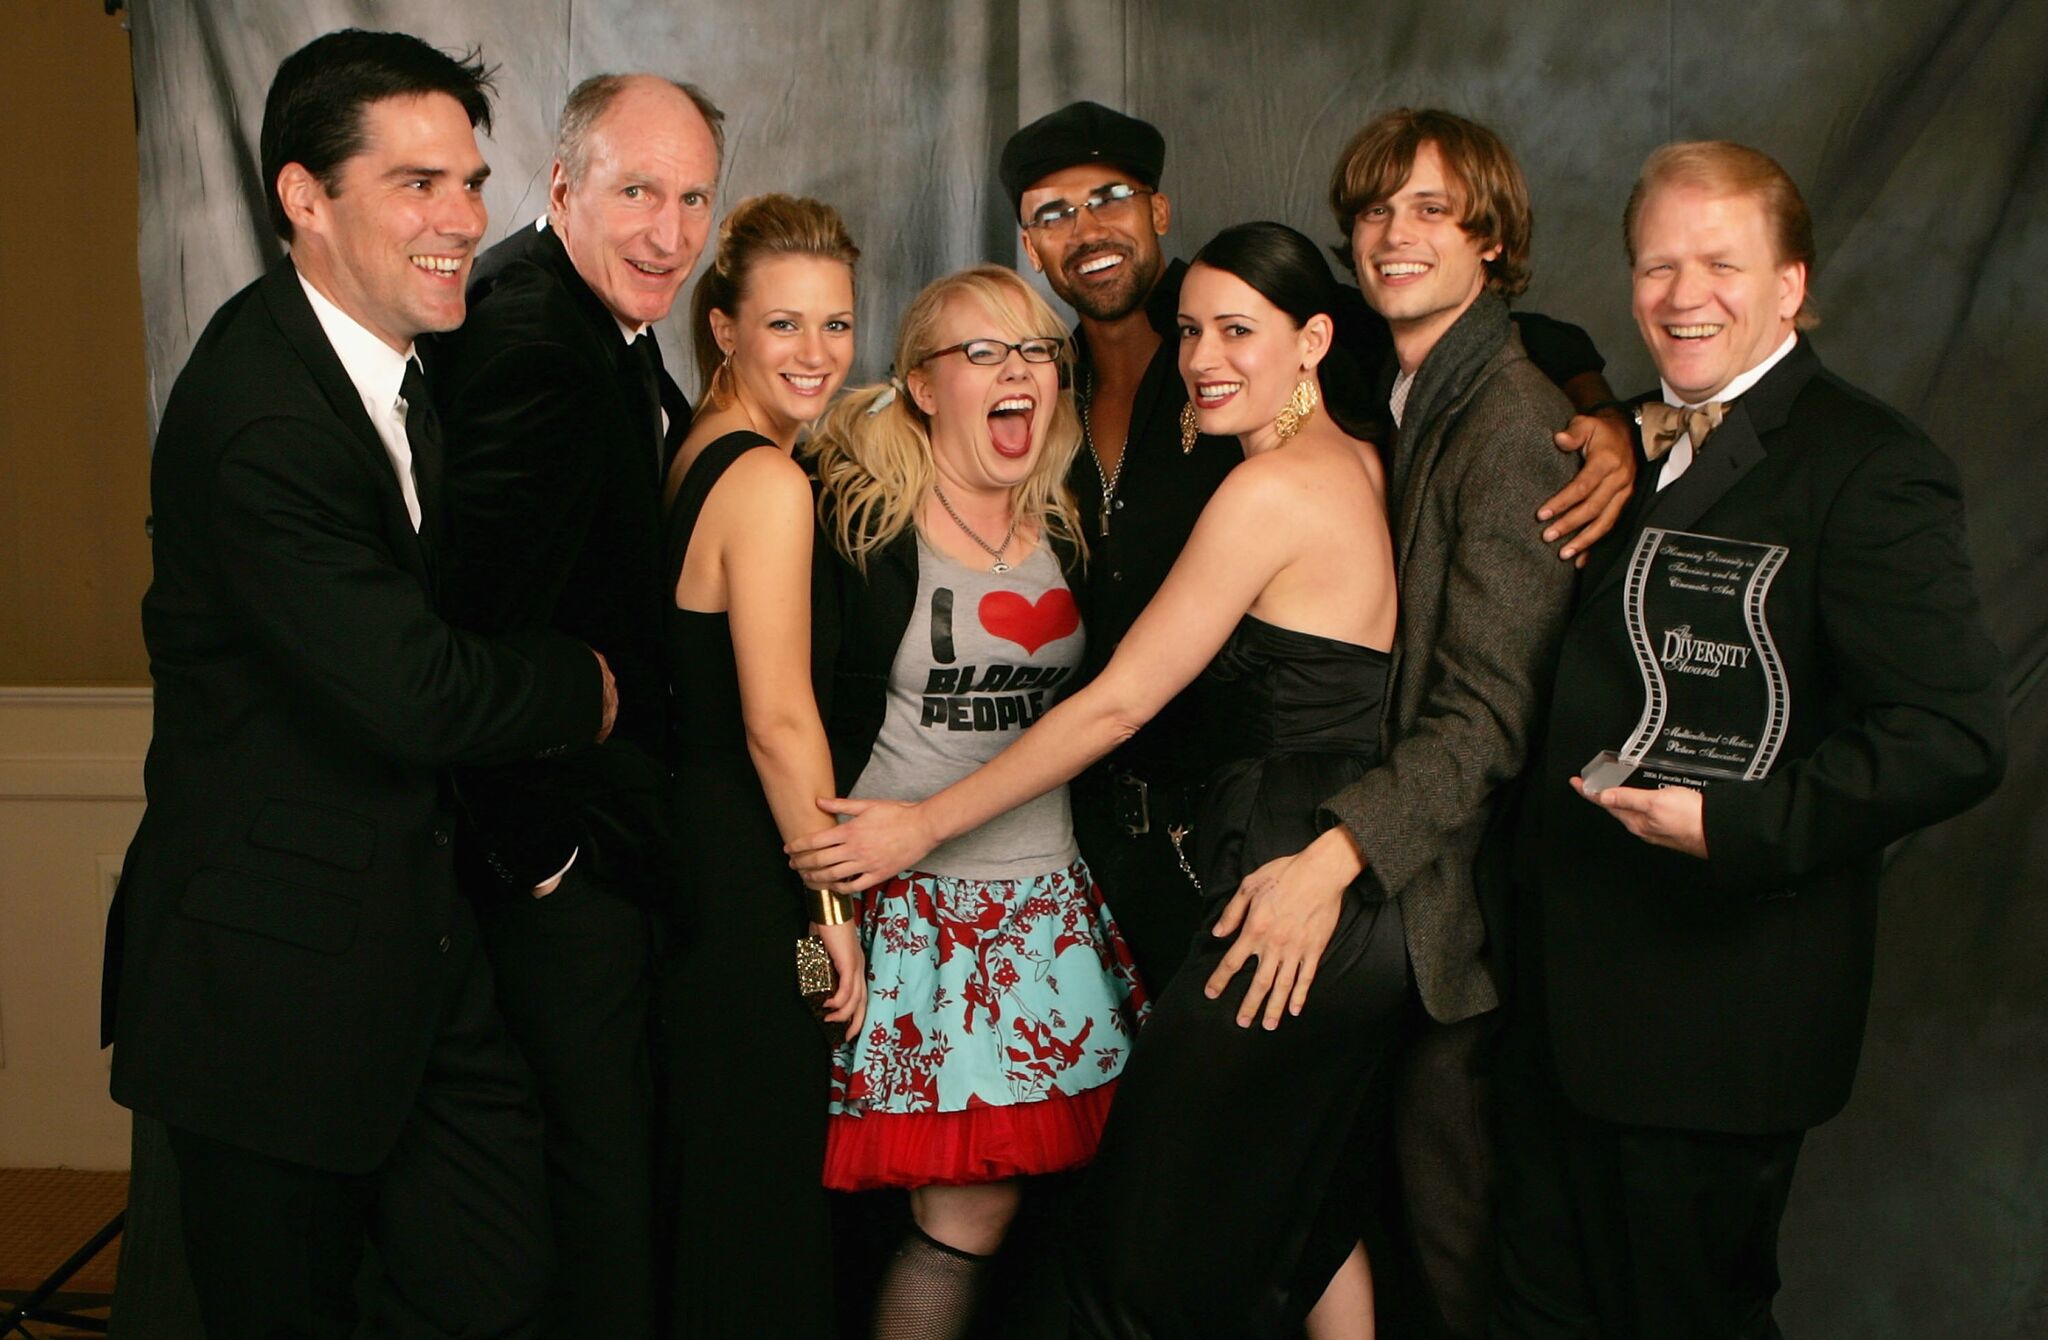 "Criminal Minds" actor Thomas Gibson, unknown actor, actress A.J. Cook, actress Kirsten Vangsness, actor Shemar Moore, actress Paget Brewster, actor Matthew Gray Gubler and Executive Producer Ed Bernero pose in the portrait studio during the 14th Annual Diversity Awards Gala | Getty Images